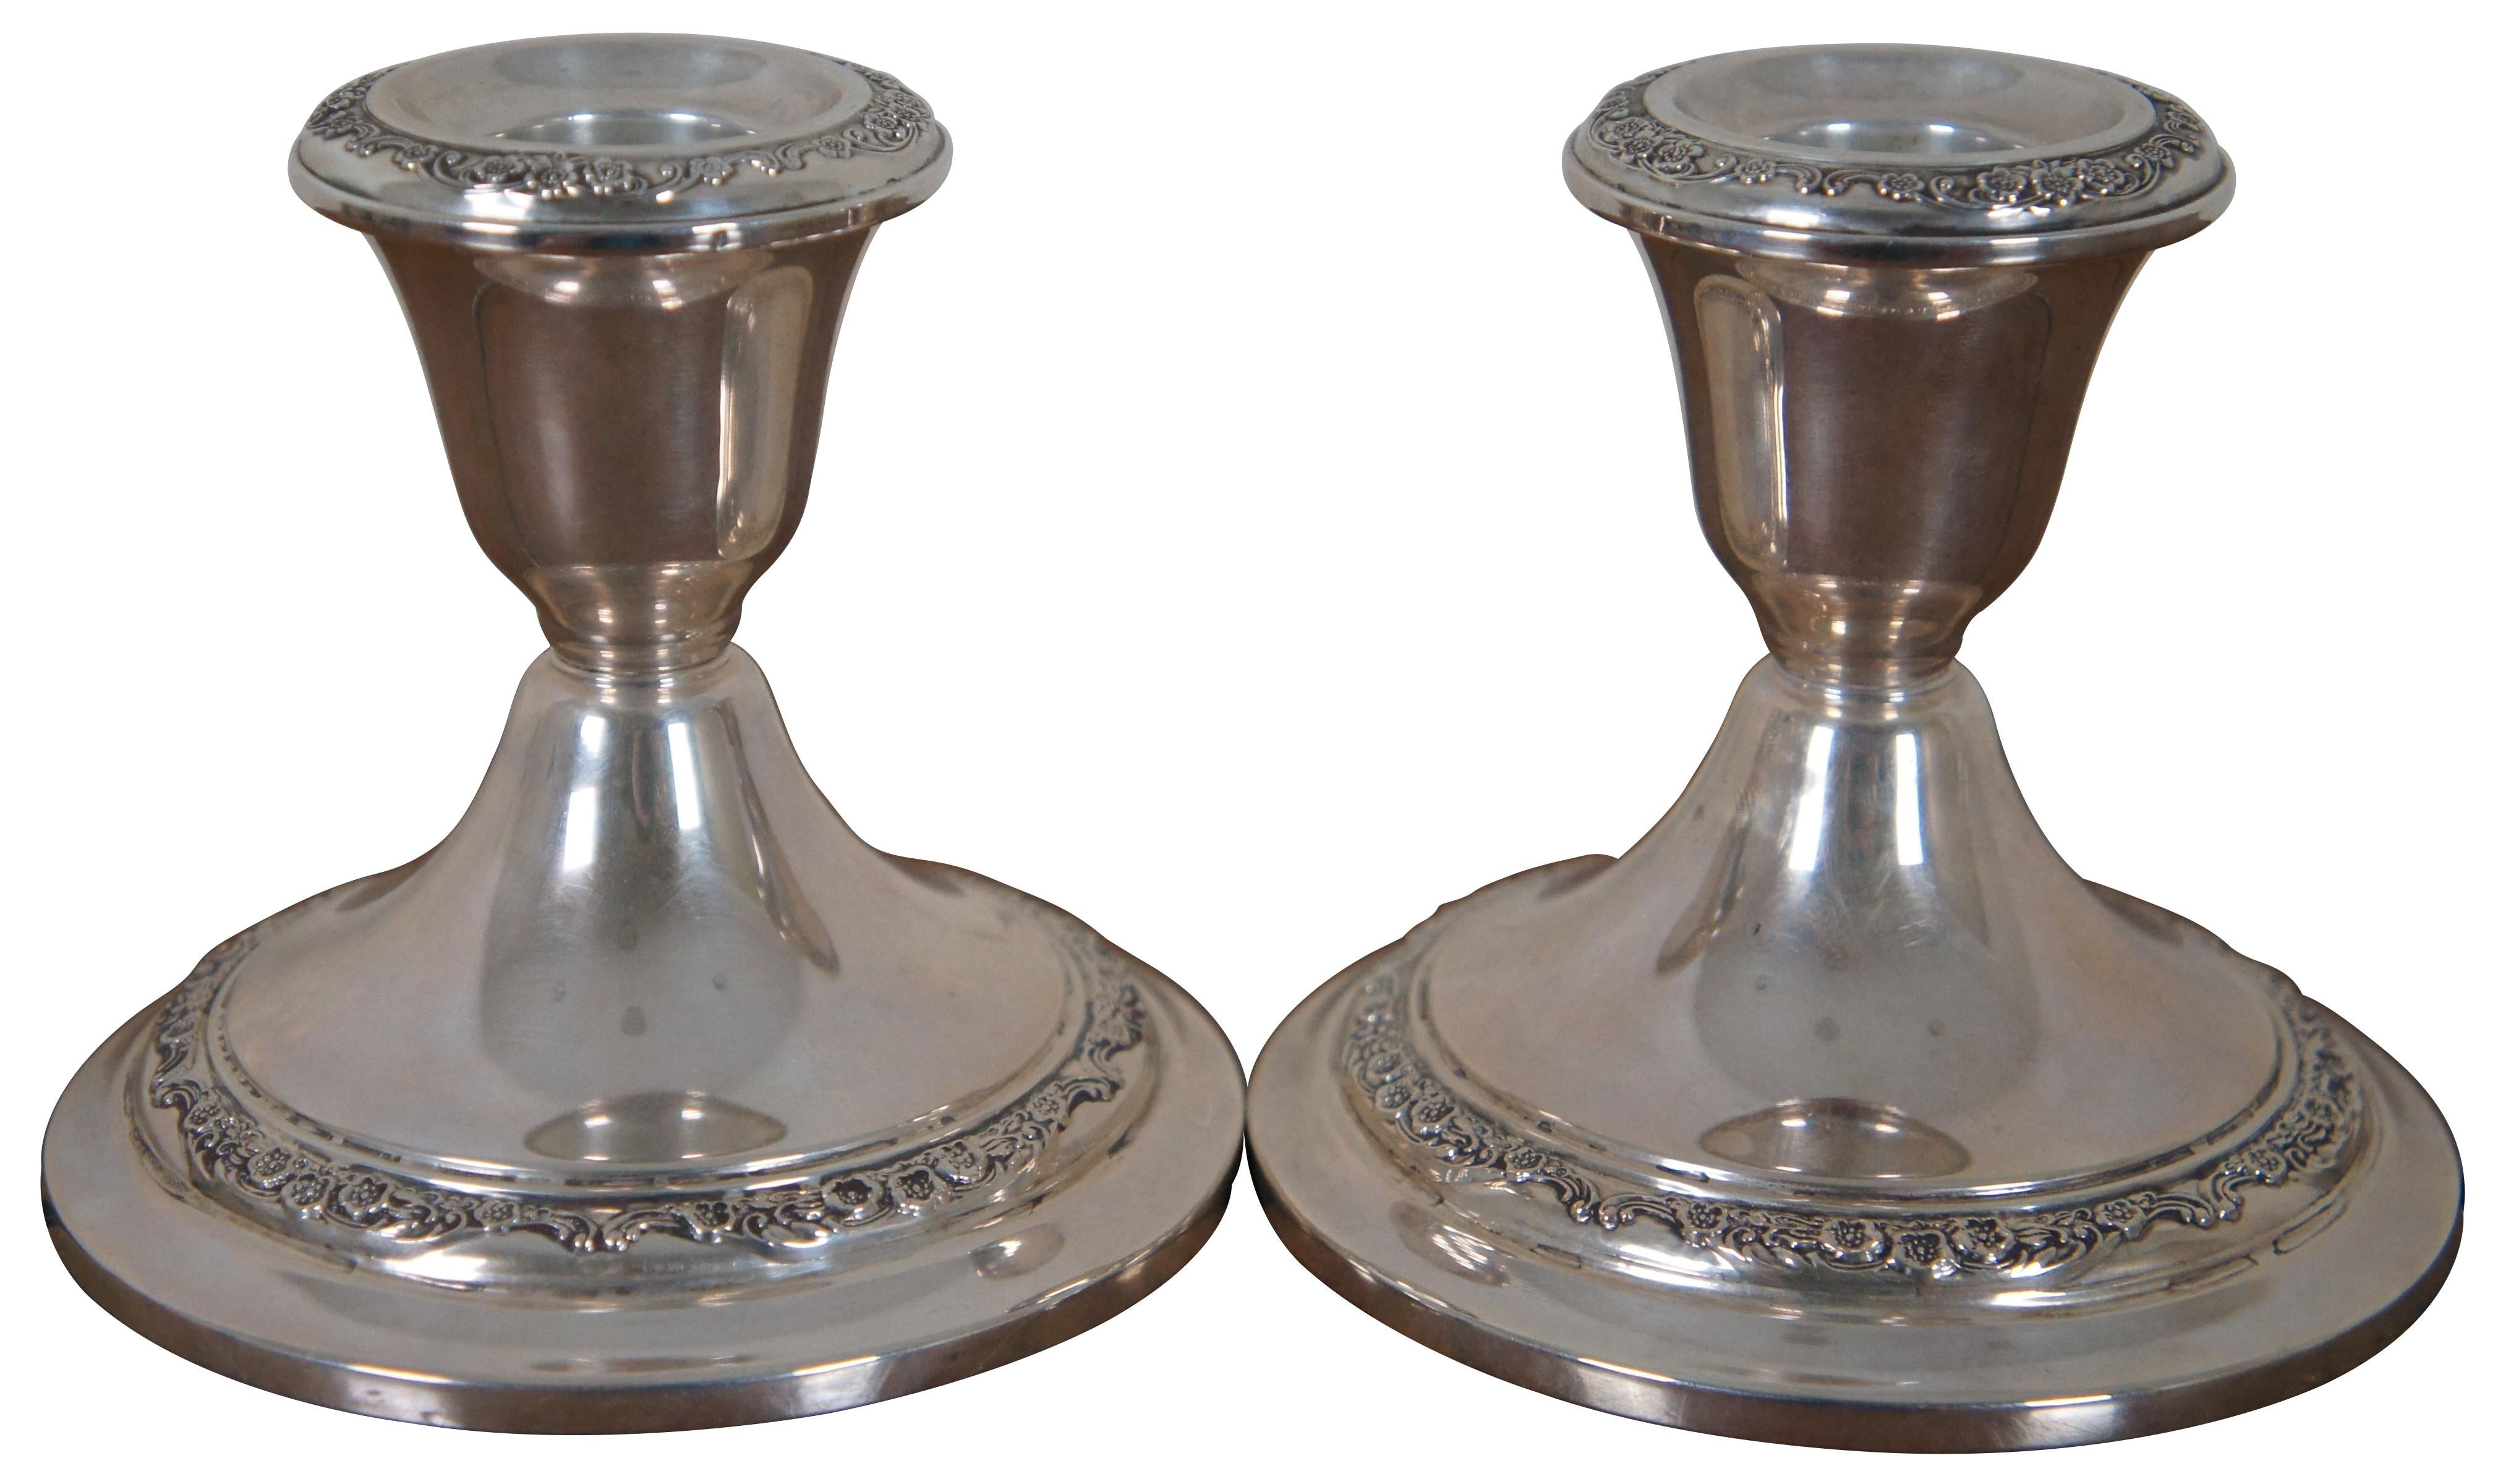 Pair of mid-century Gorham reinforced sterling silver candlestick holders decorated with bands of flowers. 960.

